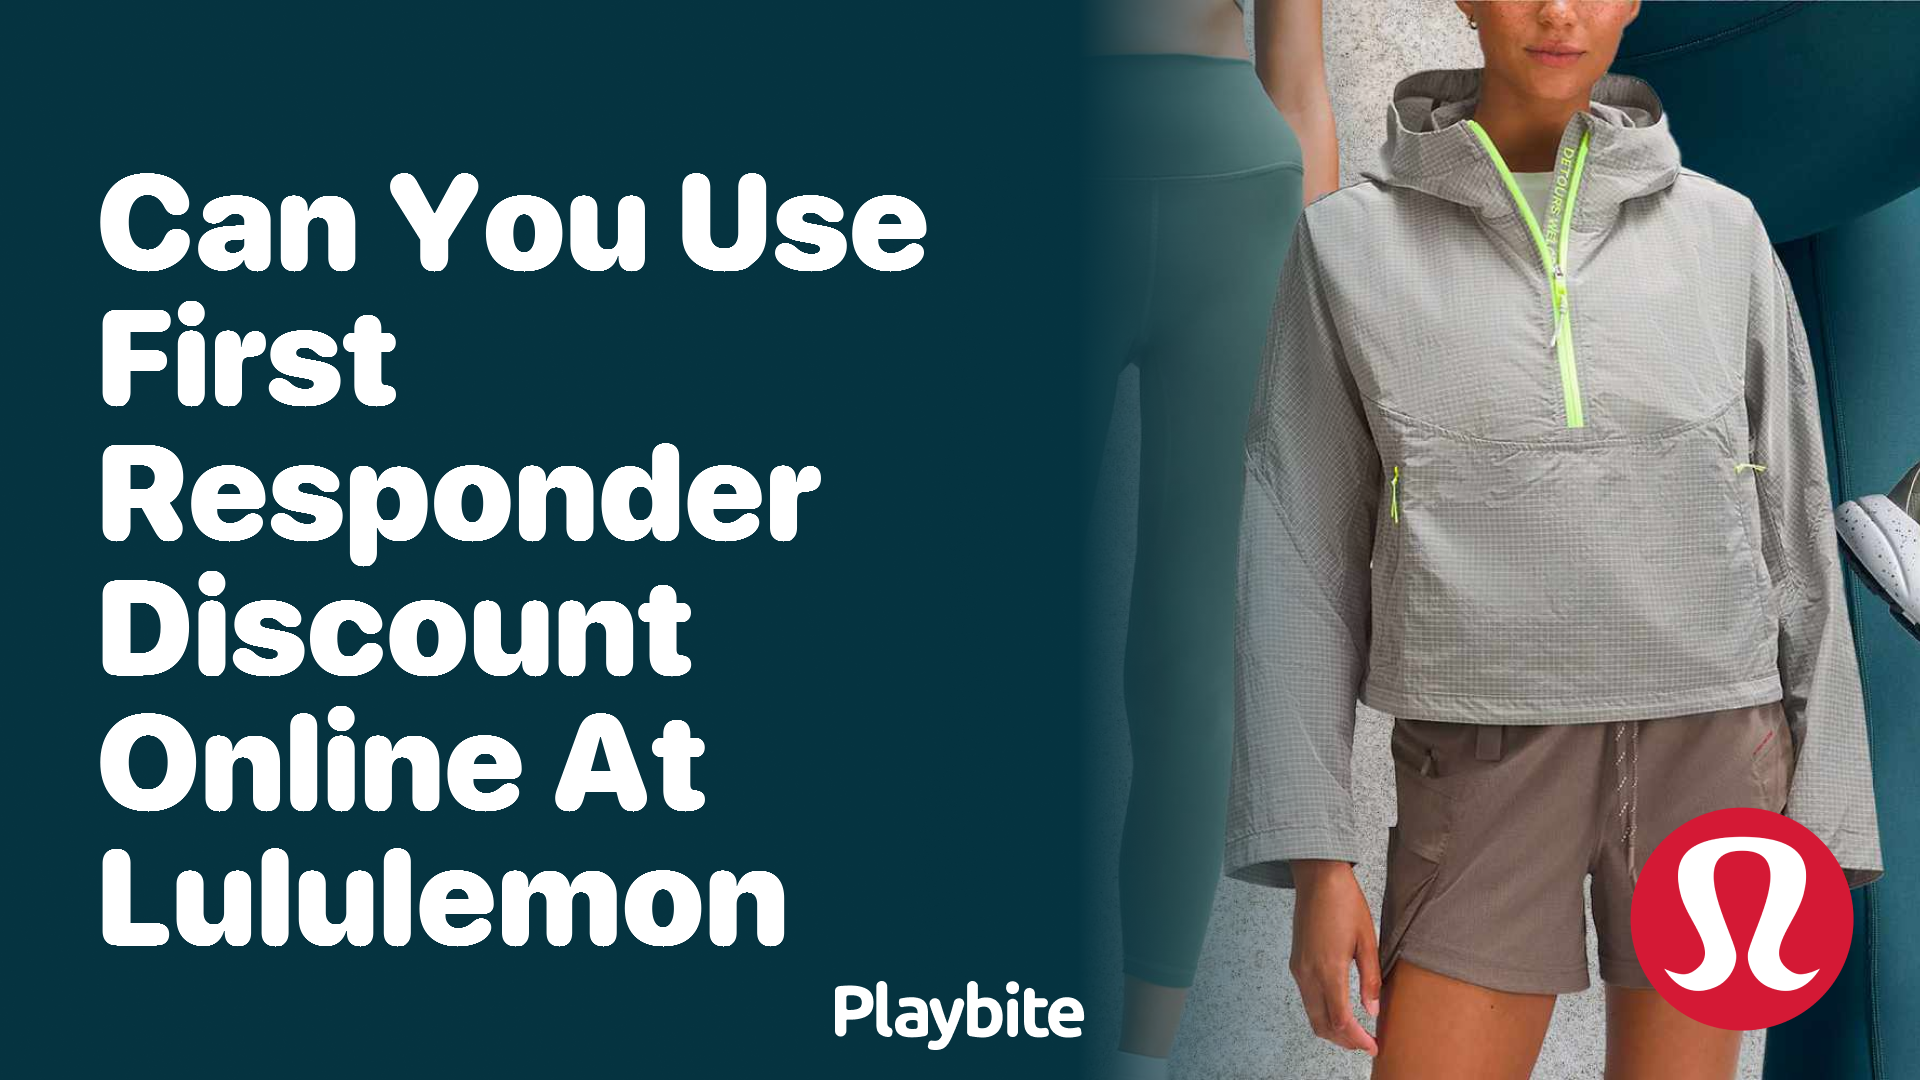 Can You Use First Responder Discount Online at Lululemon? - Playbite